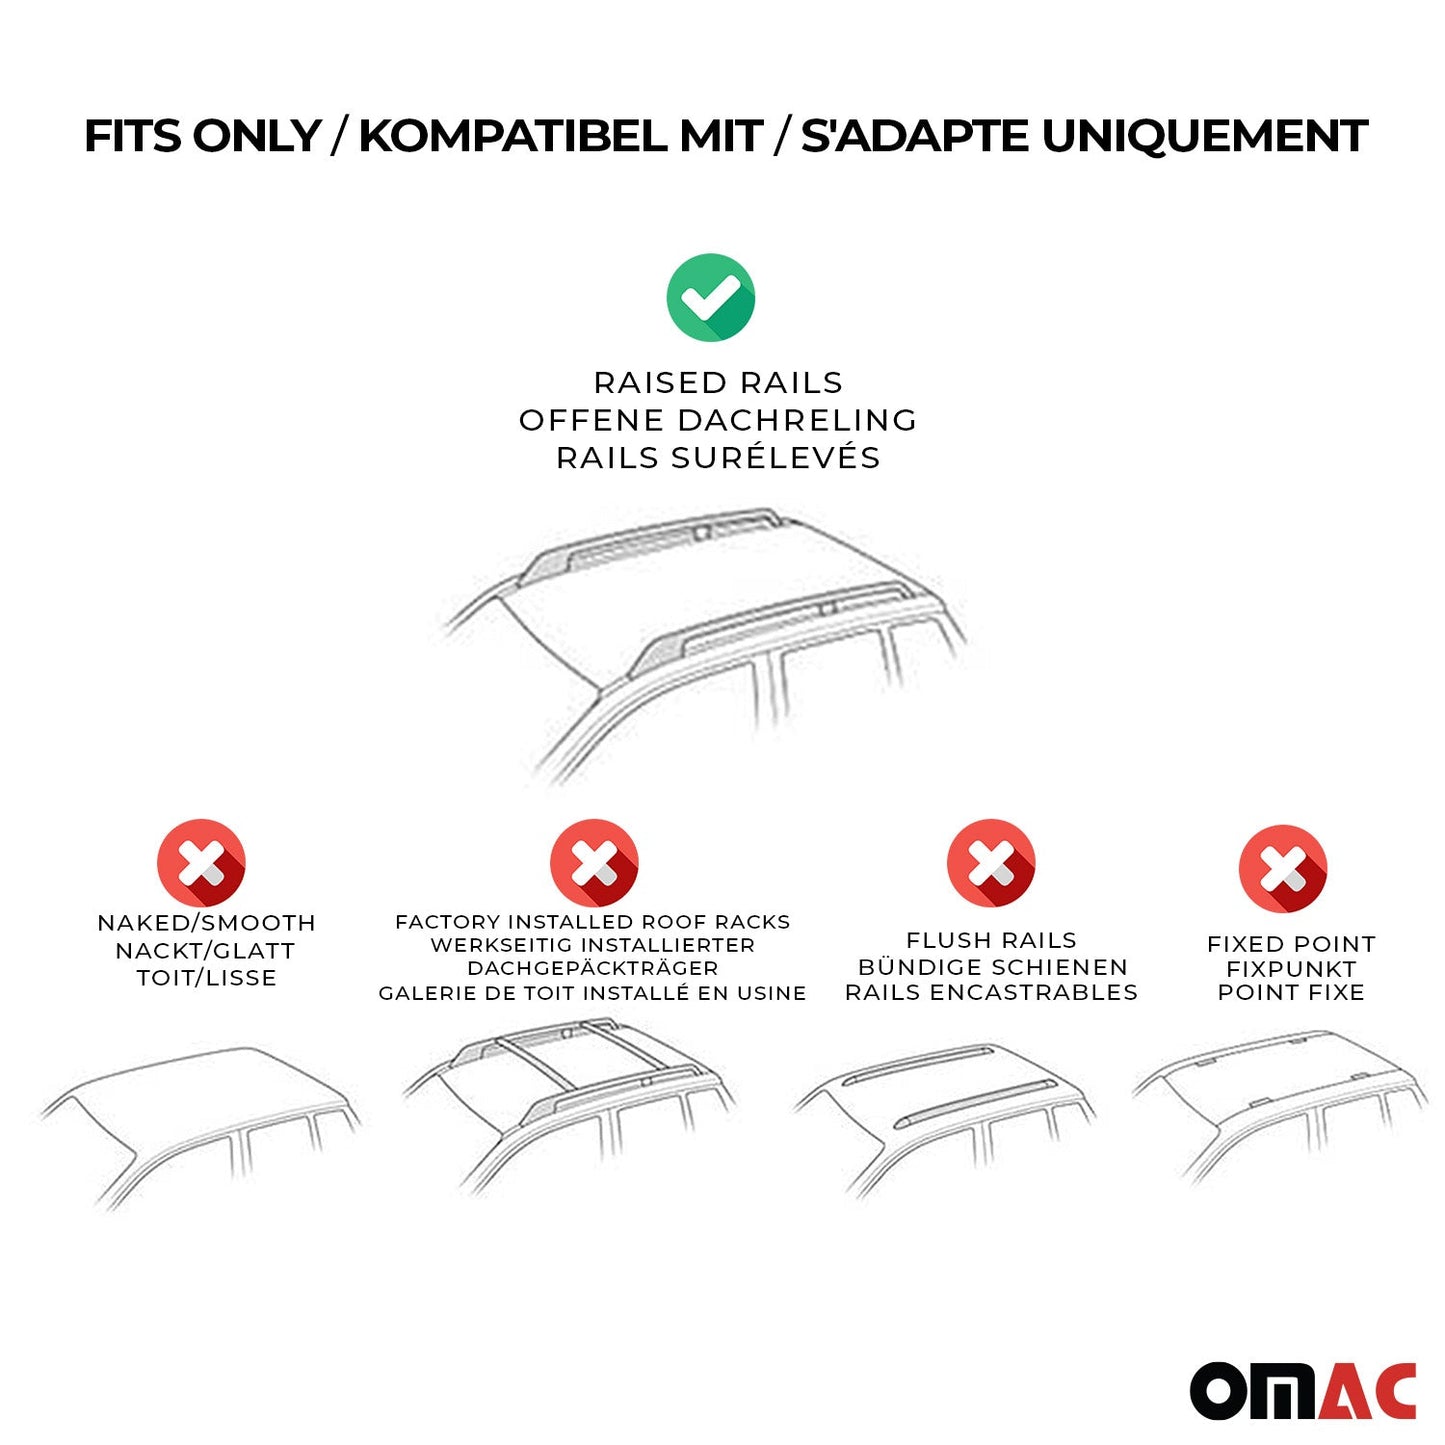 OMAC Lockable Roof Rack Cross Bars Luggage Carrier for Ford Ranger 2024 Alu Silver 2x G003379